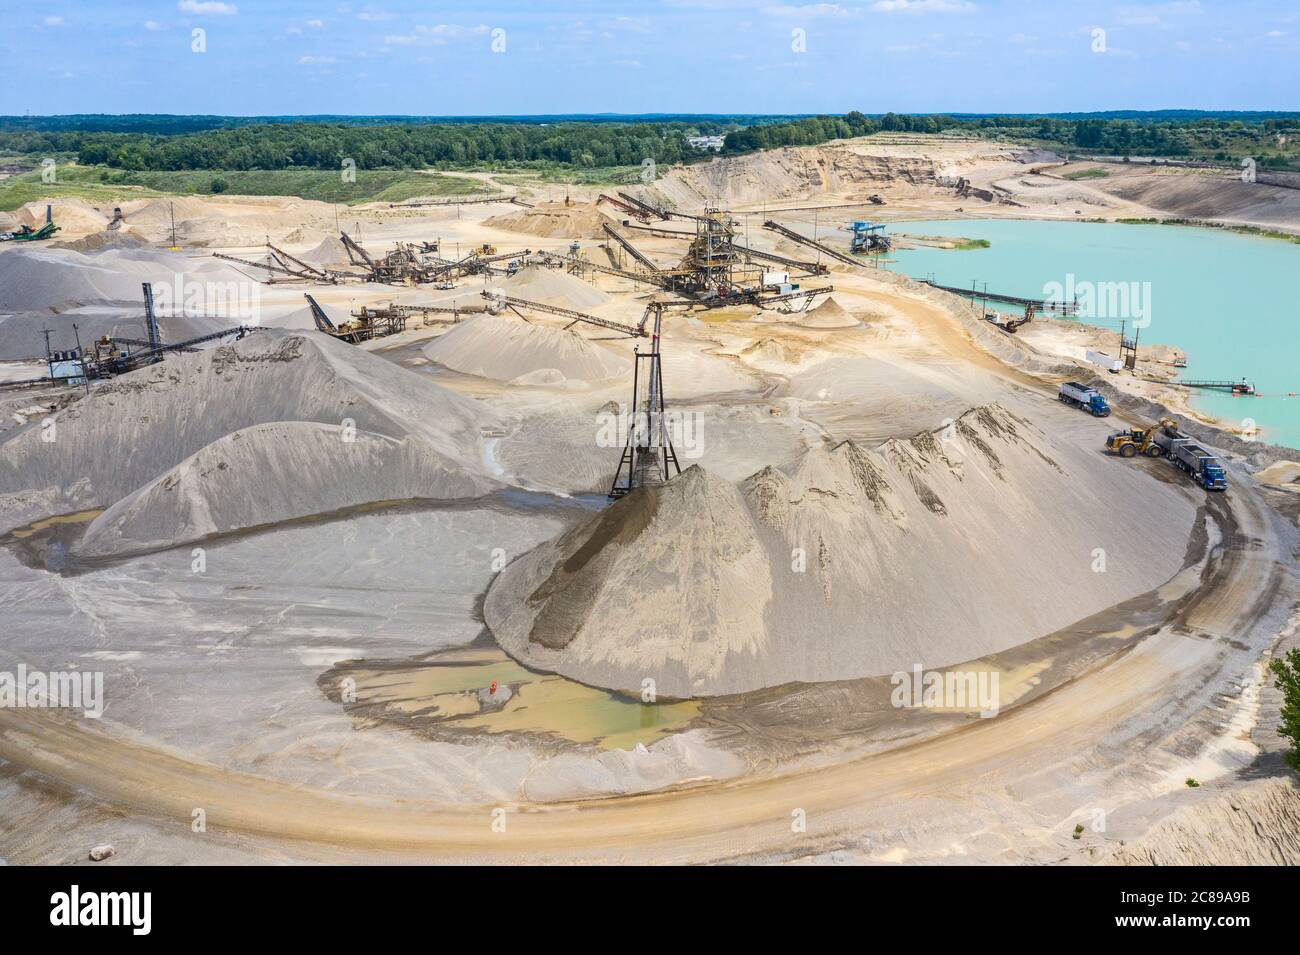 Davisburg, Michigan - Holly Sand and Gravel, an aggregate mining operation owned by the Edward C Levy Company. The company's products are used in road Stock Photo